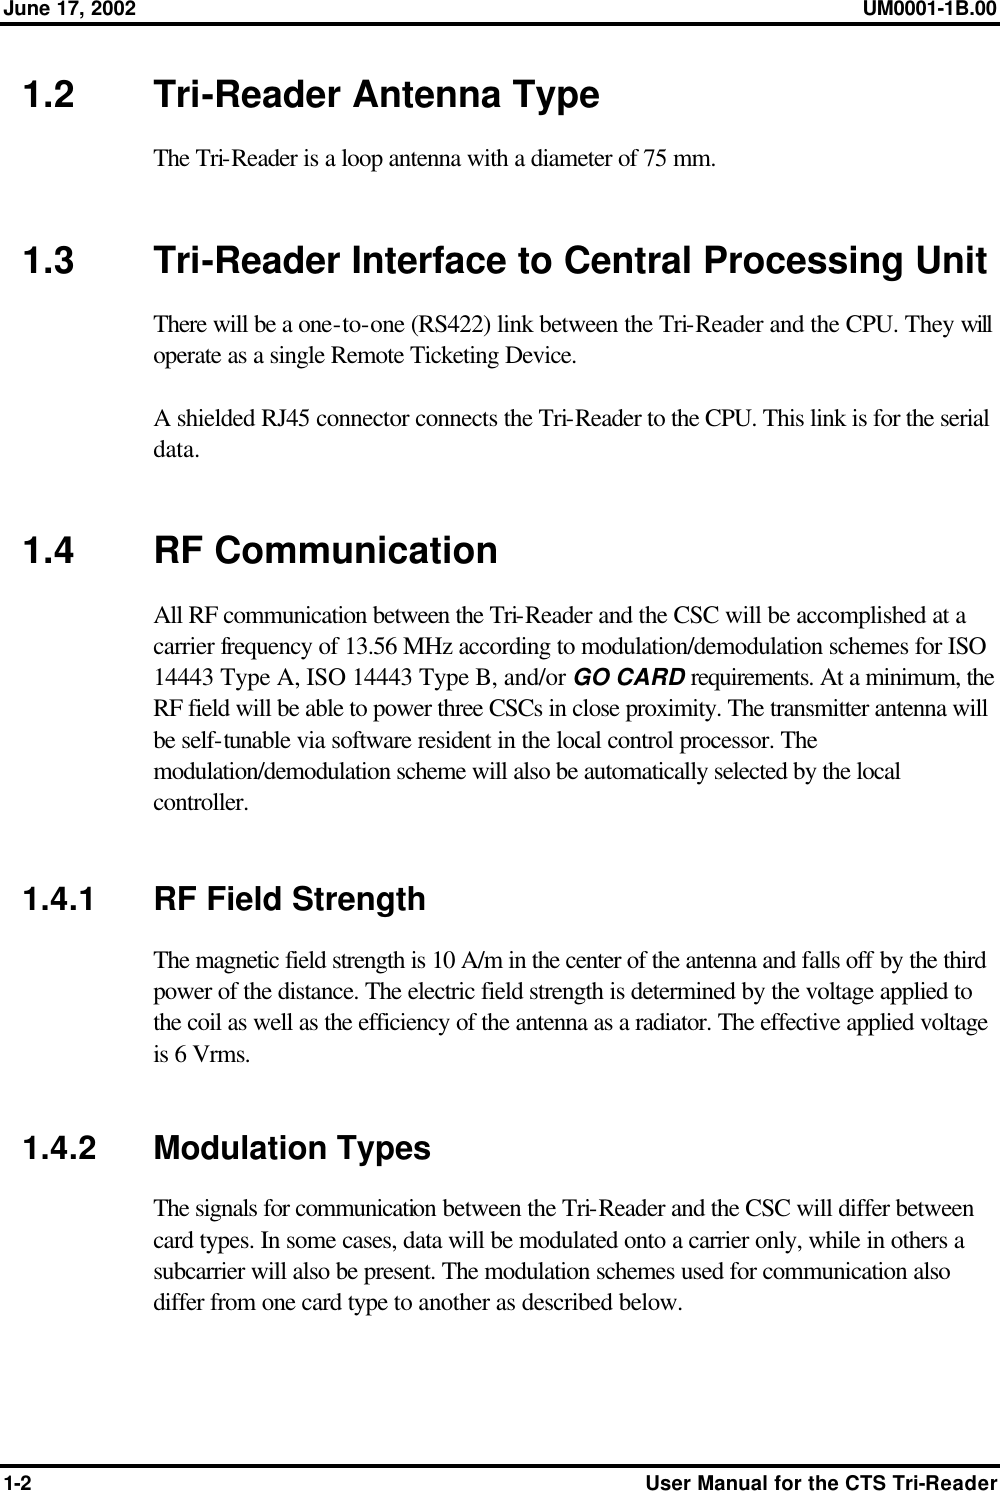 June 17, 2002 UM0001-1B.00  1-2 User Manual for the CTS Tri-Reader 1.2 Tri-Reader Antenna Type The Tri-Reader is a loop antenna with a diameter of 75 mm.   1.3 Tri-Reader Interface to Central Processing Unit There will be a one-to-one (RS422) link between the Tri-Reader and the CPU. They will operate as a single Remote Ticketing Device.  A shielded RJ45 connector connects the Tri-Reader to the CPU. This link is for the serial data.   1.4 RF Communication All RF communication between the Tri-Reader and the CSC will be accomplished at a carrier frequency of 13.56 MHz according to modulation/demodulation schemes for ISO 14443 Type A, ISO 14443 Type B, and/or GO CARD requirements. At a minimum, the RF field will be able to power three CSCs in close proximity. The transmitter antenna will be self-tunable via software resident in the local control processor. The modulation/demodulation scheme will also be automatically selected by the local controller.   1.4.1 RF Field Strength The magnetic field strength is 10 A/m in the center of the antenna and falls off by the third power of the distance. The electric field strength is determined by the voltage applied to the coil as well as the efficiency of the antenna as a radiator. The effective applied voltage is 6 Vrms.   1.4.2 Modulation Types The signals for communication between the Tri-Reader and the CSC will differ between card types. In some cases, data will be modulated onto a carrier only, while in others a subcarrier will also be present. The modulation schemes used for communication also differ from one card type to another as described below.  